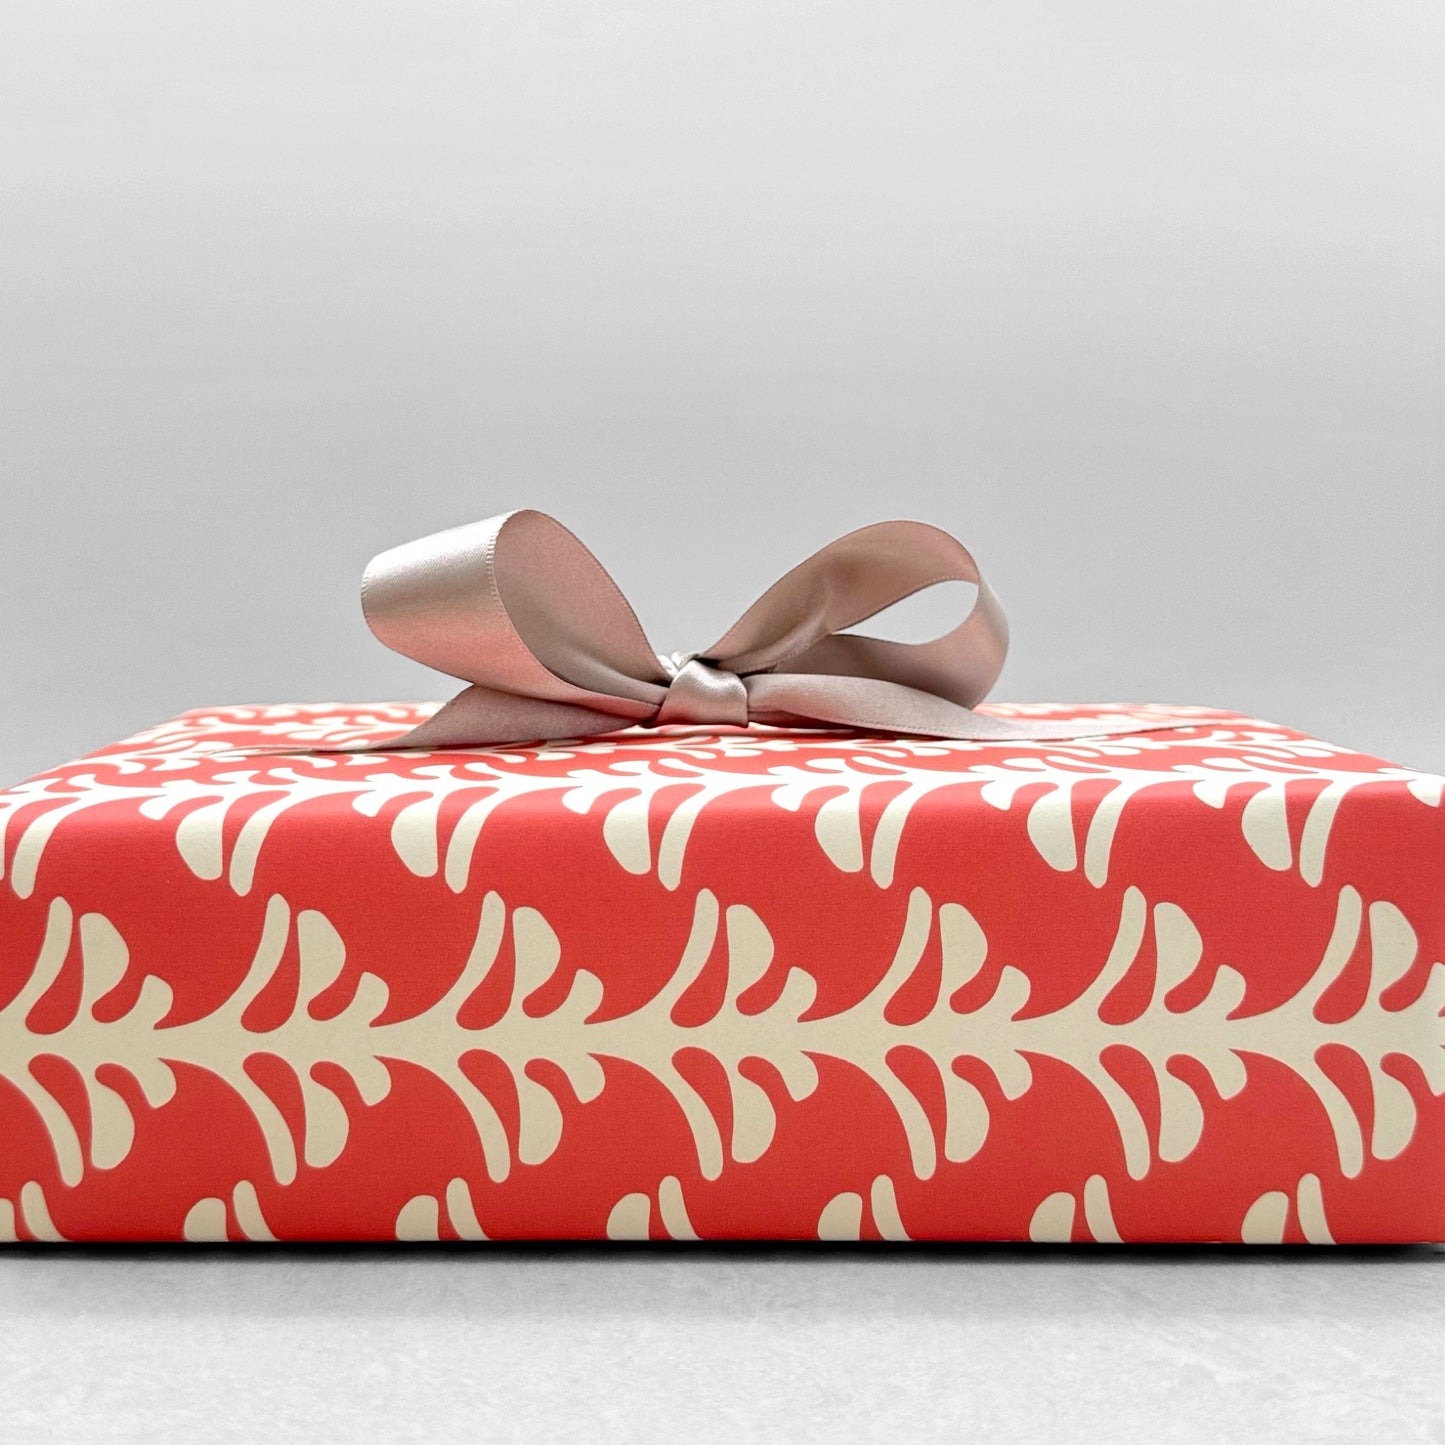 wrapping paper by Otto Editions with a cut-out palm design in white on a coral pink background. Pictured wrapped as a present with a bow